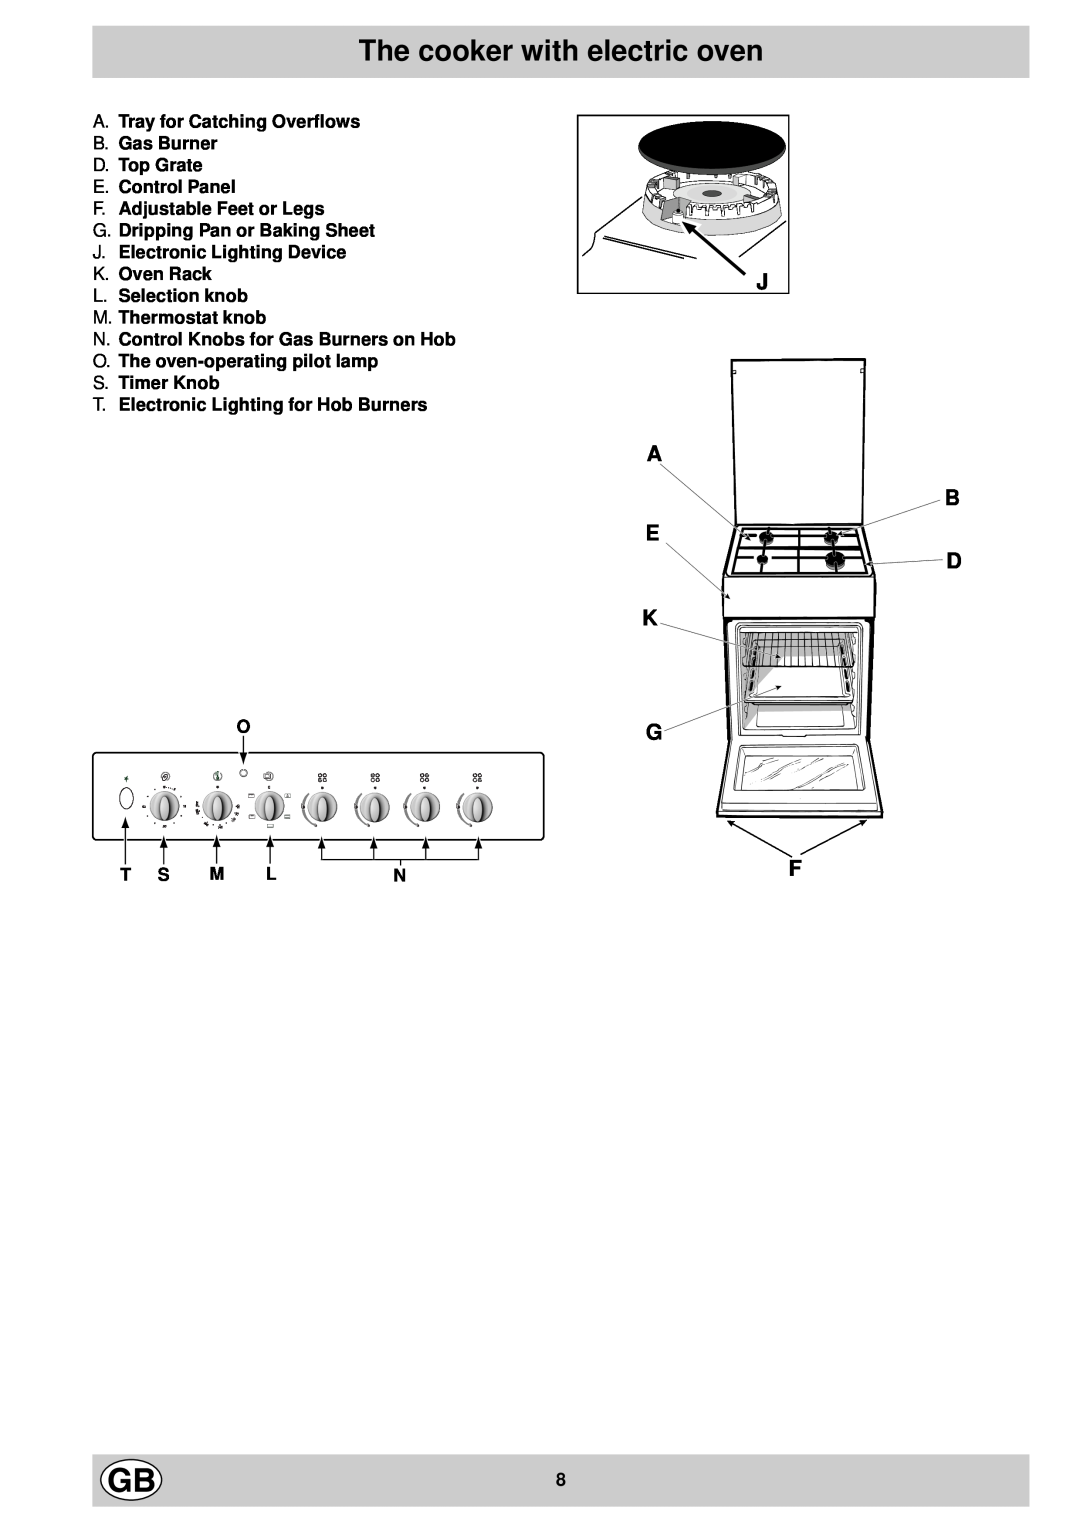 Indesit K 344 E.C/G manual The cooker with electric oven, A B E D K 